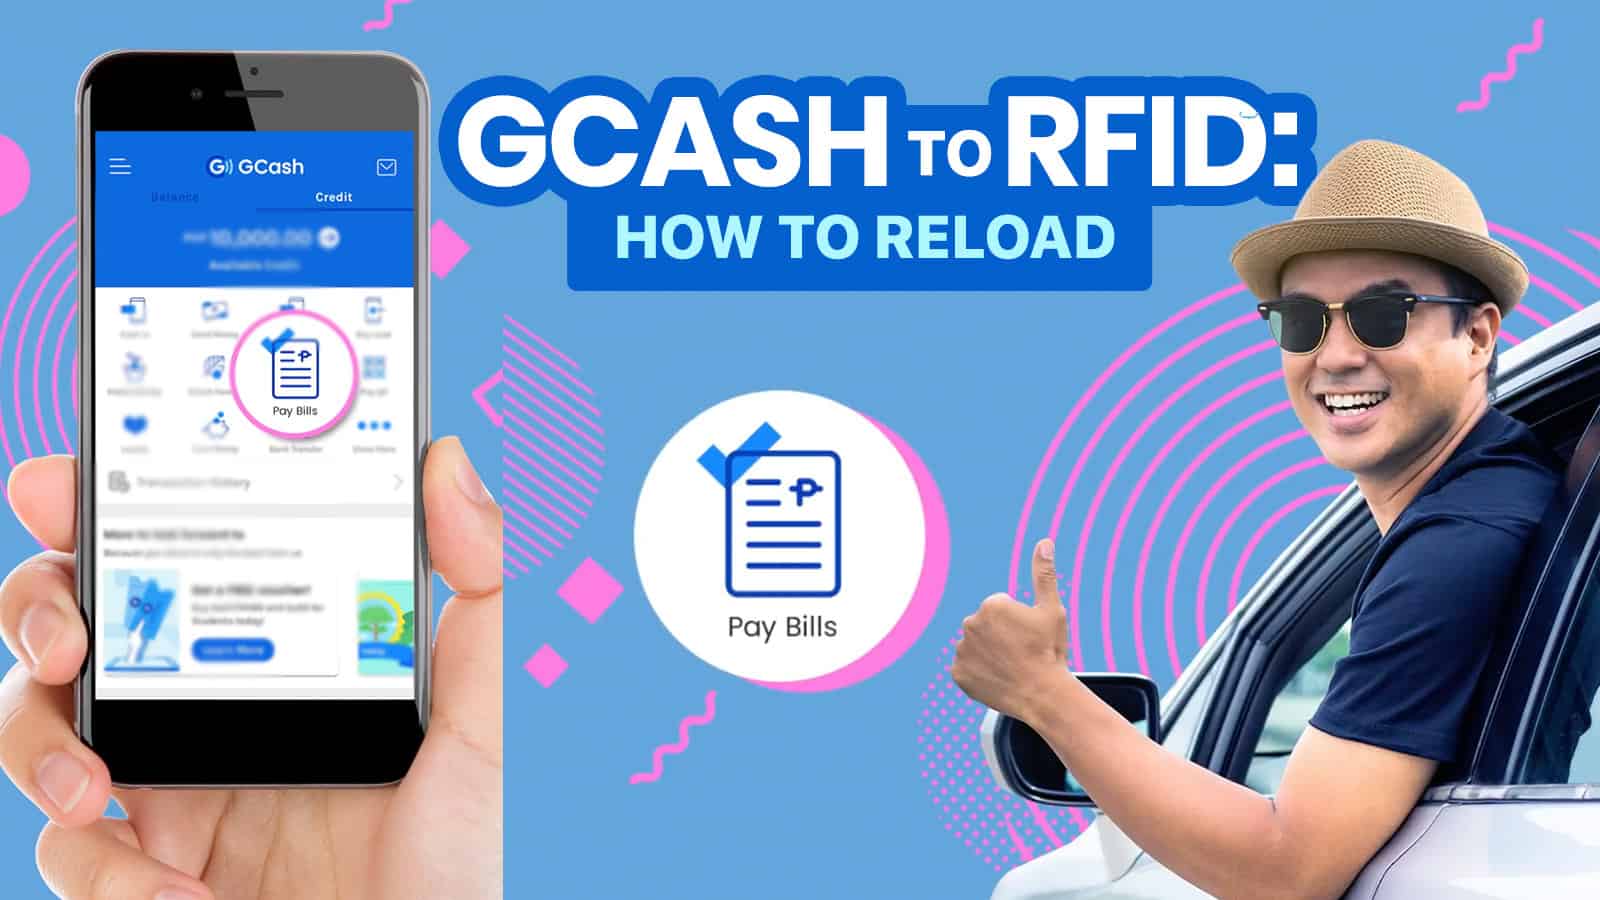 HOW TO RELOAD EASYTRIP & AUTOSWEEP RFID Using GCASH